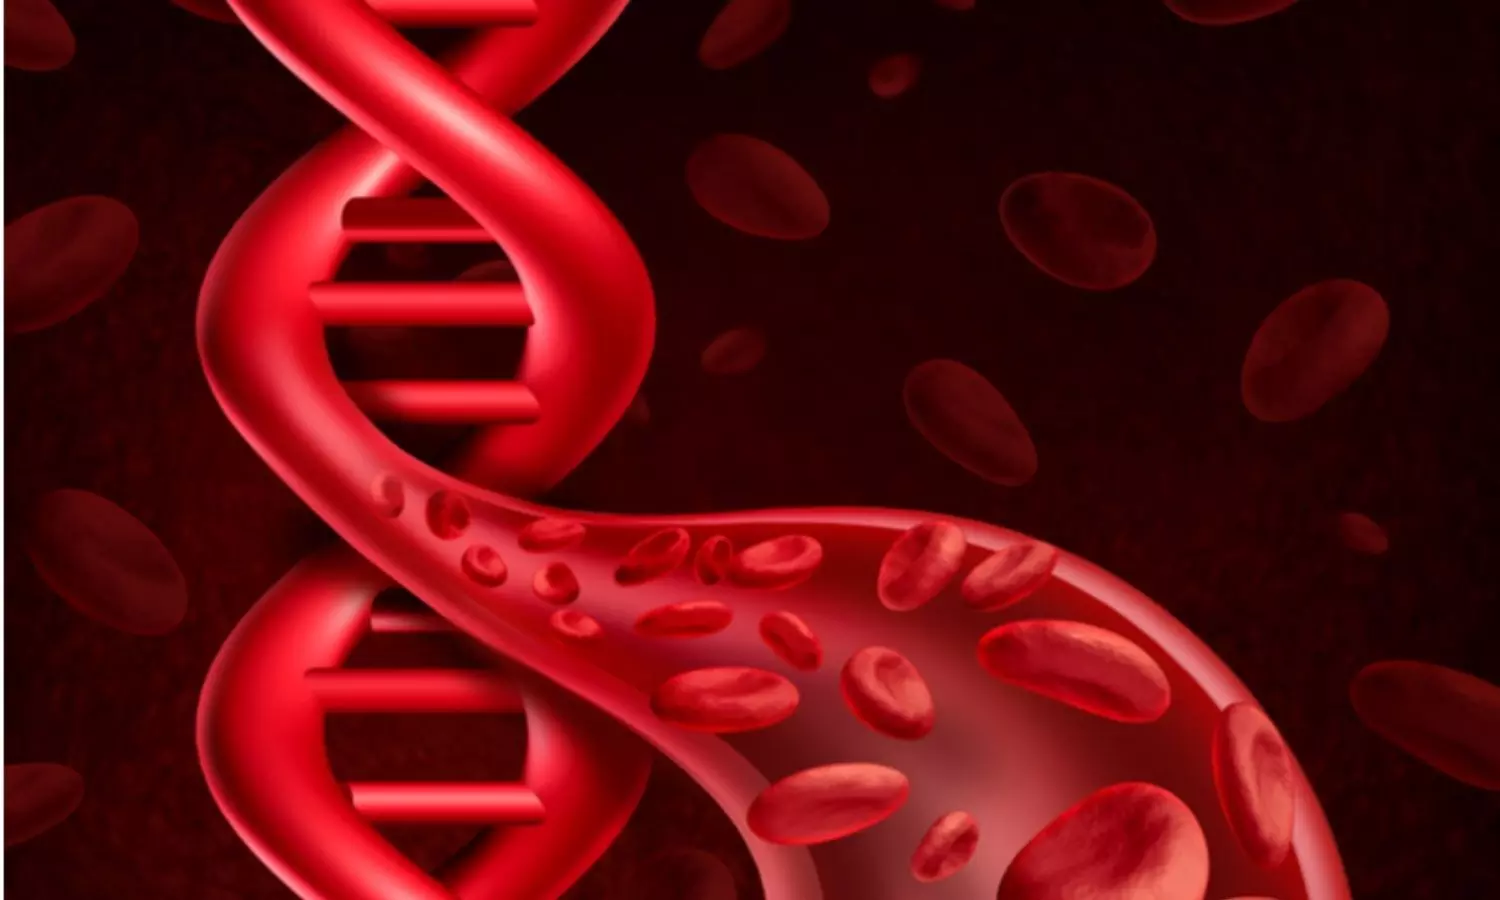 Gene therapy found effective in  Severe Hemophilia A in Phase 3 Study in Adults